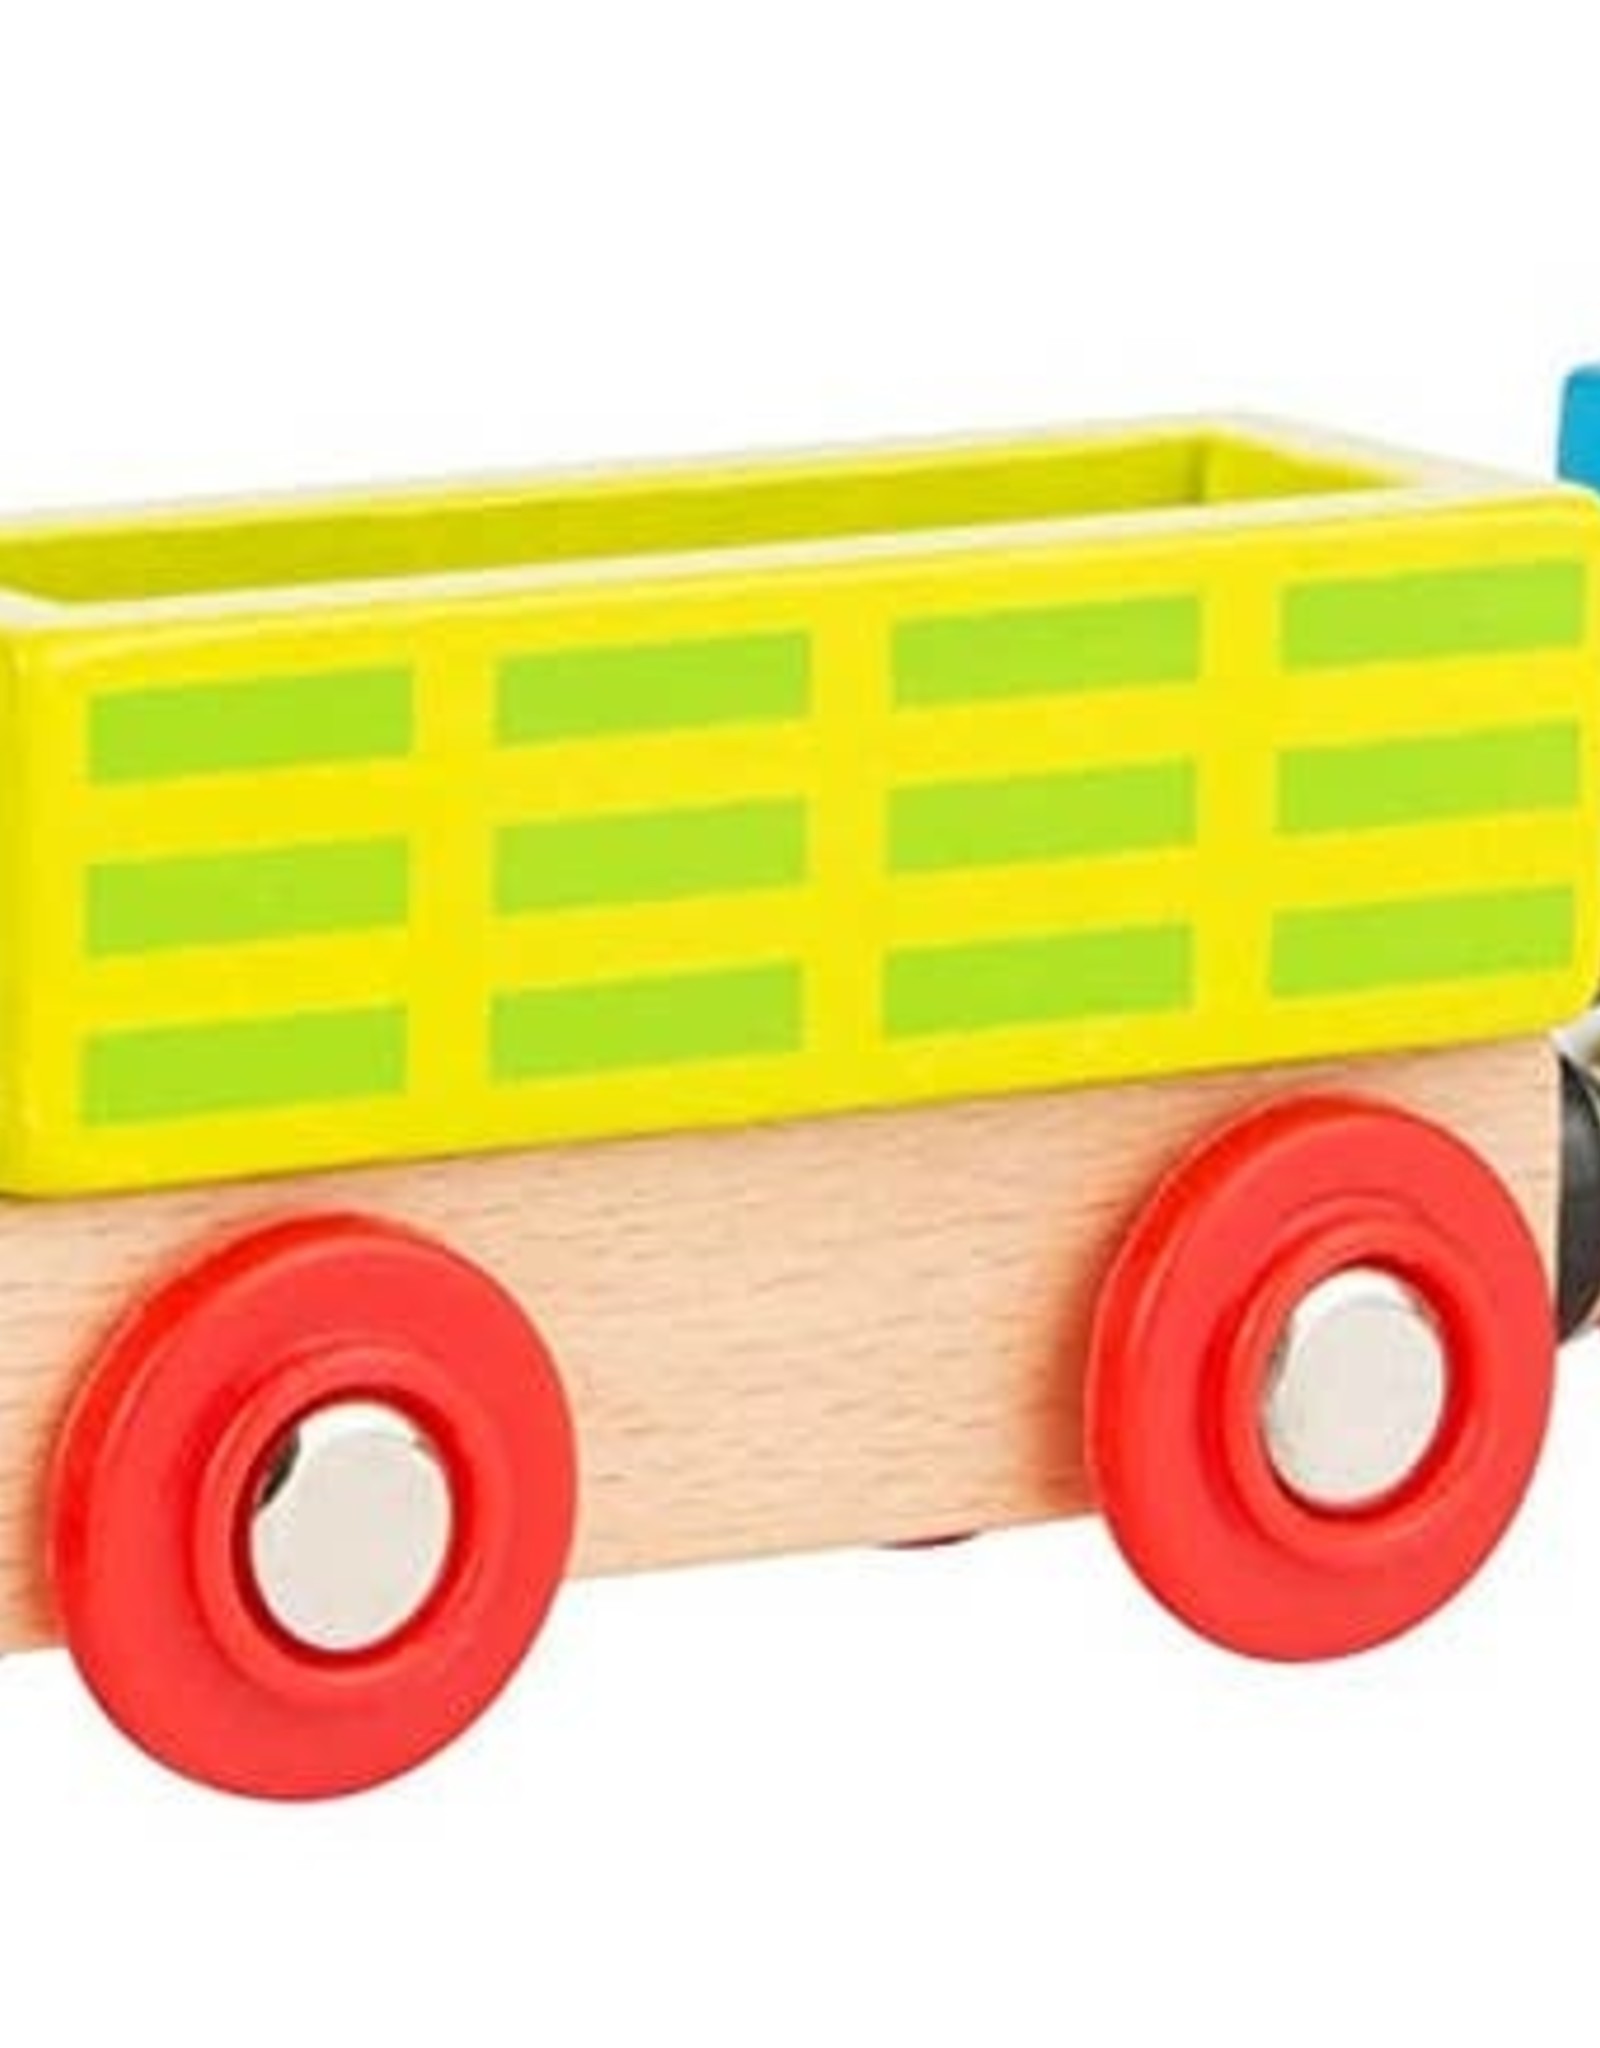 Hauck Toys 10504 Wooden Toy Train, My Zoo